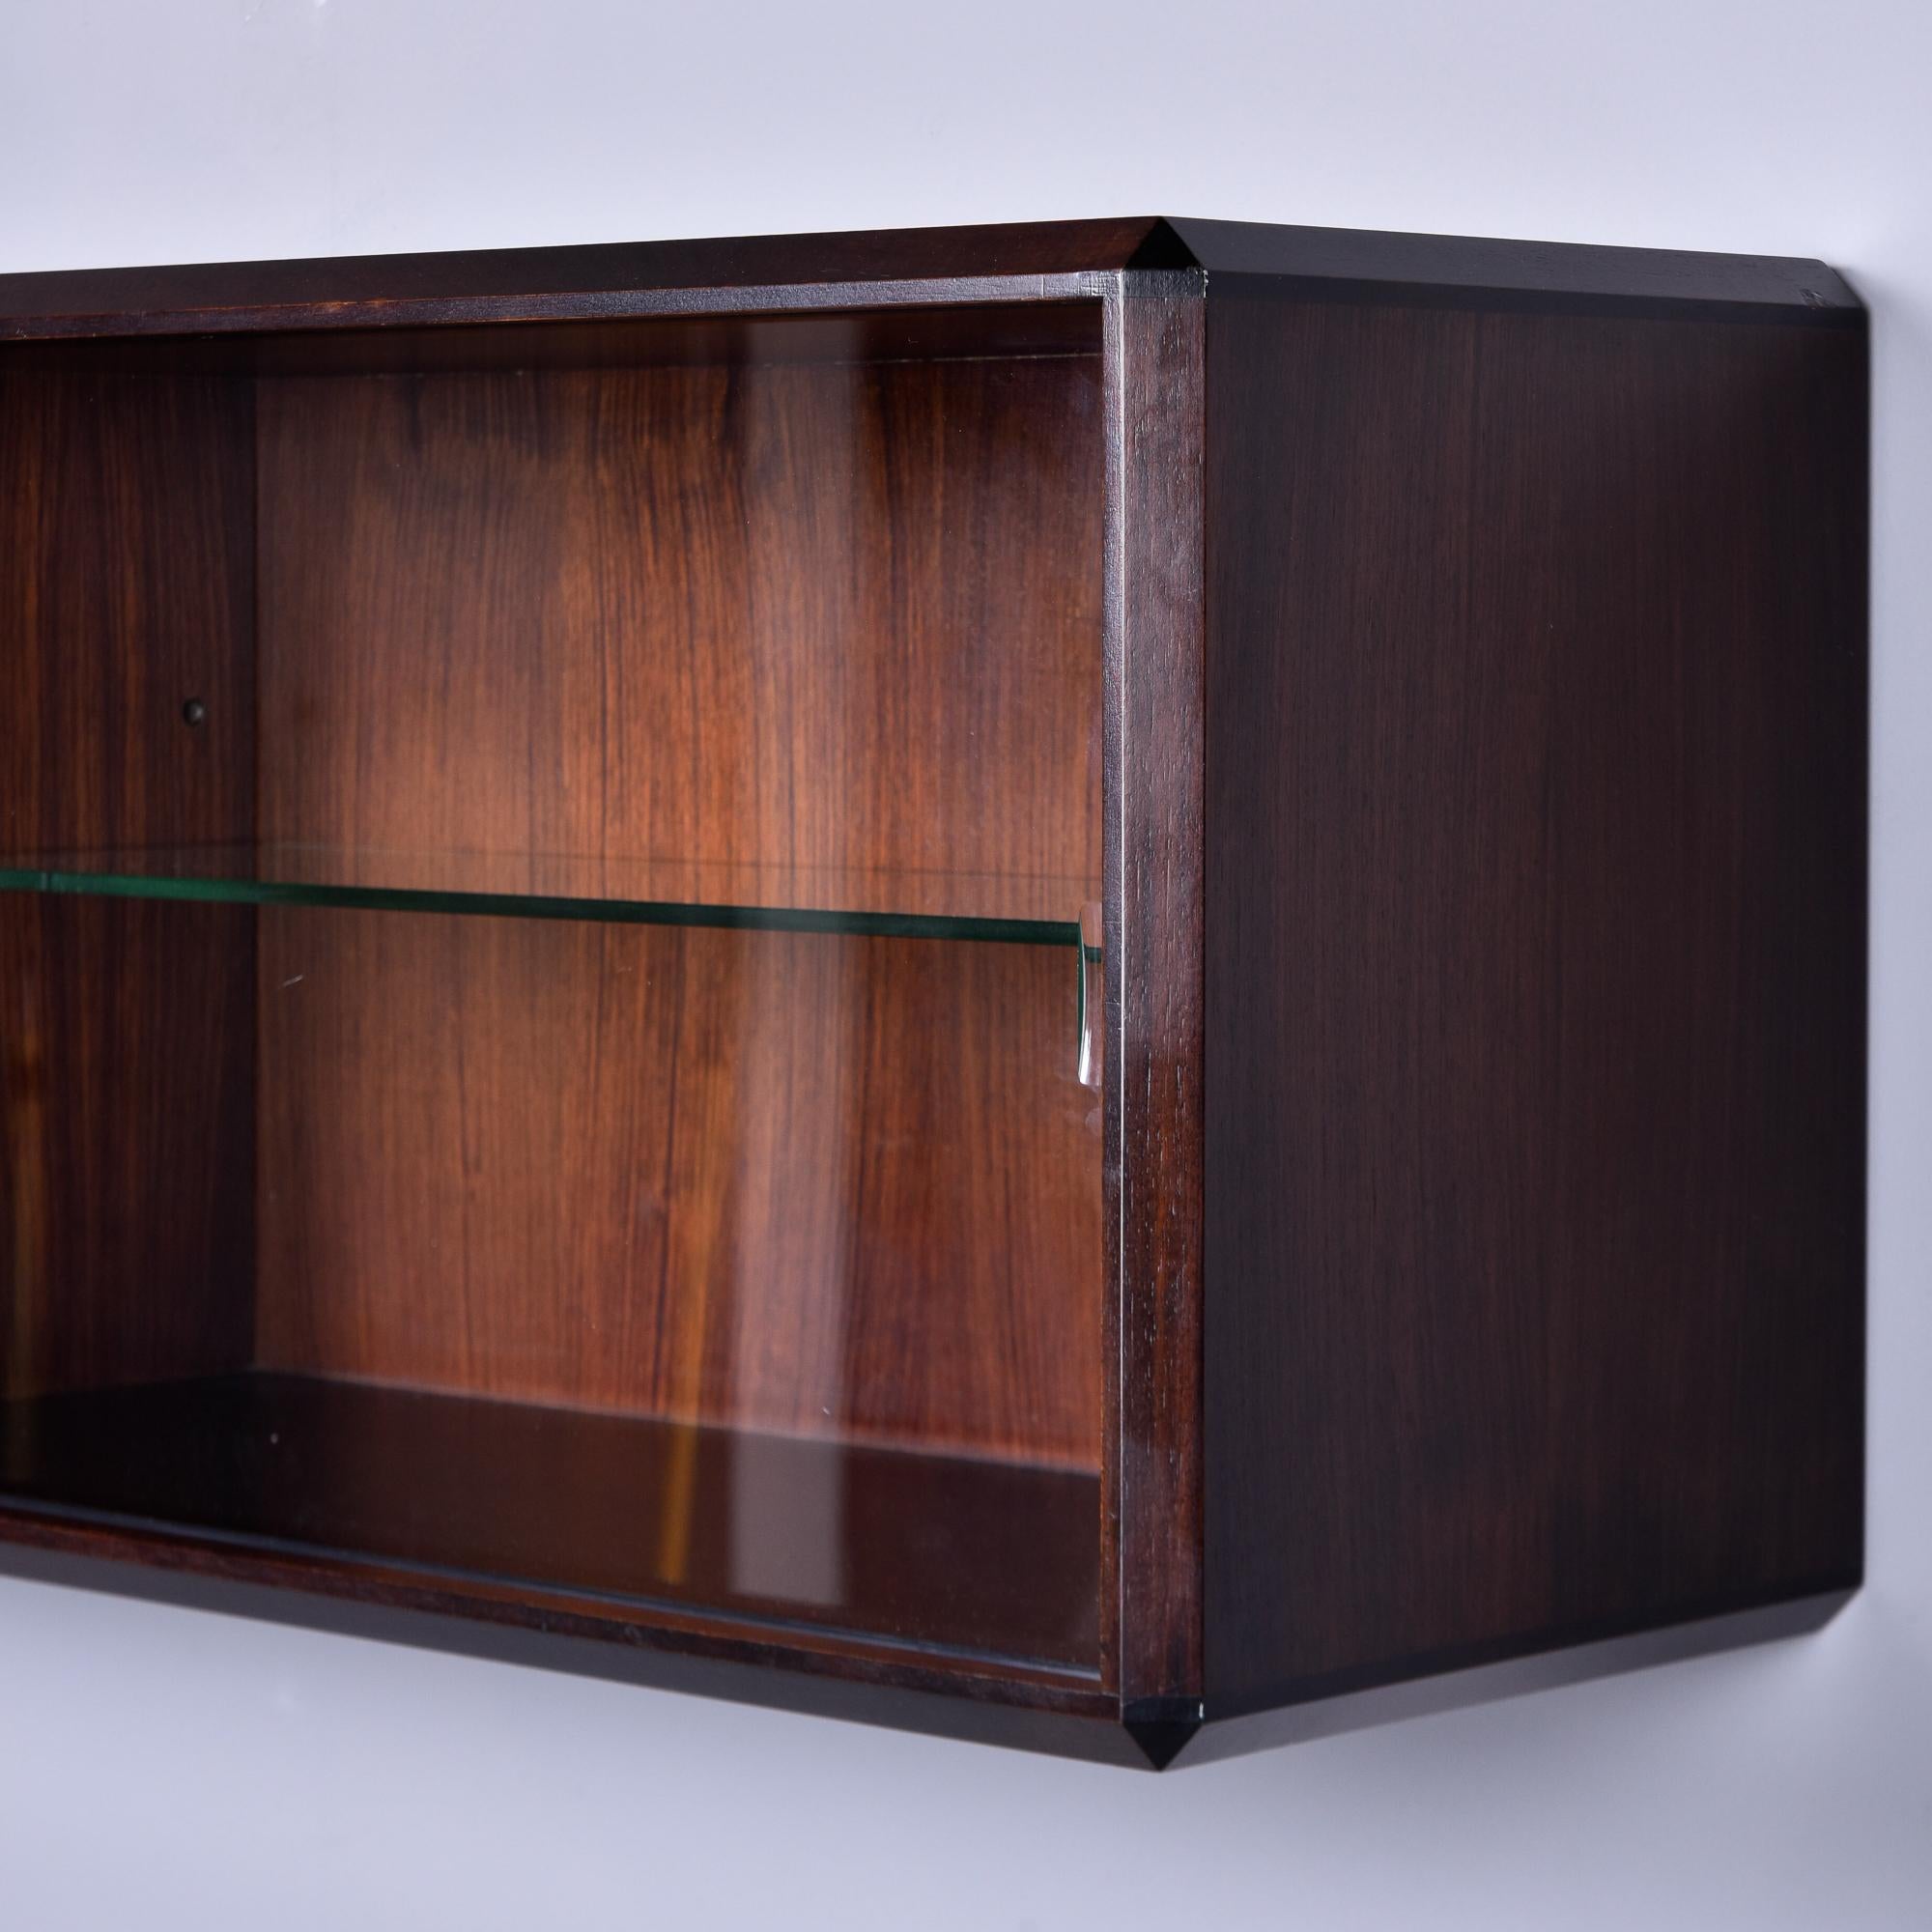 20th Century Italian Mid Century Wall Cabinet In Walnut with Glass Doors and Interior Shelves For Sale